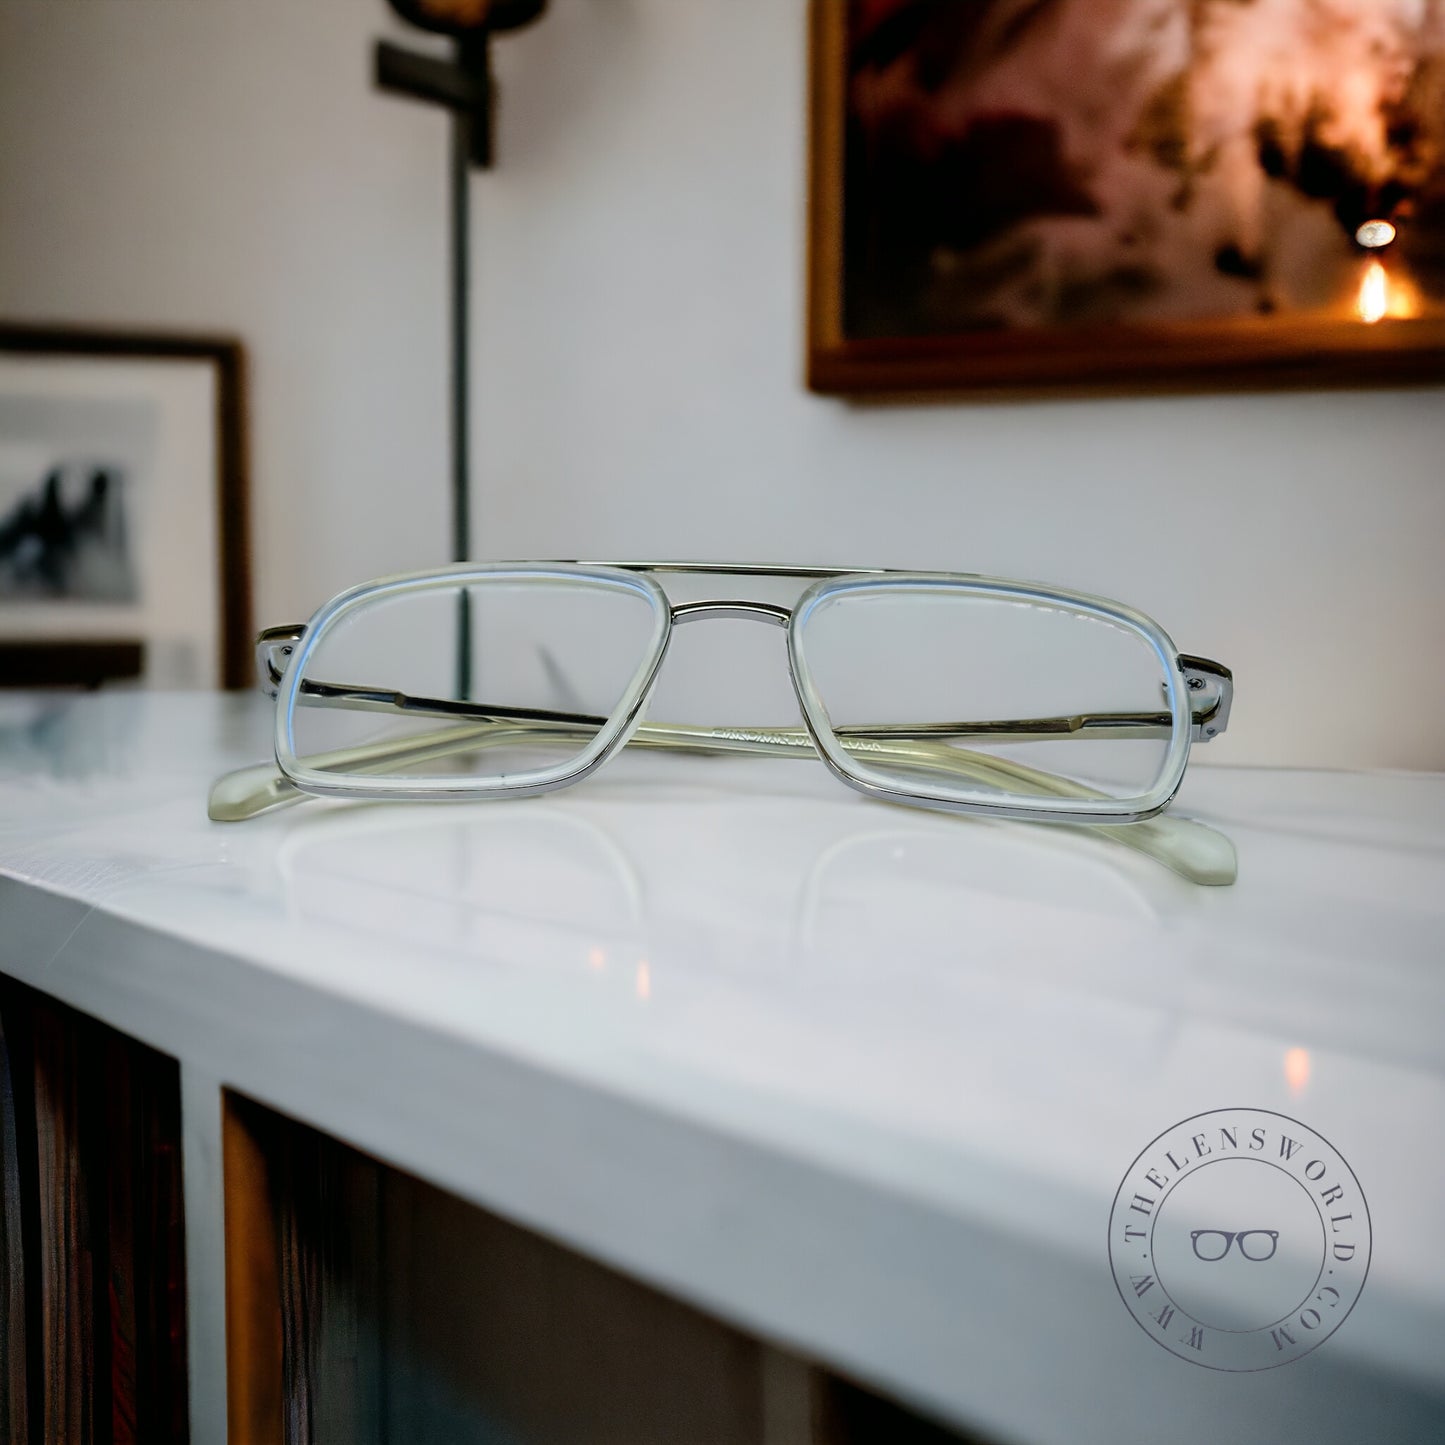 Aculus Frames with anti blue cut glass replaceable with any lenses